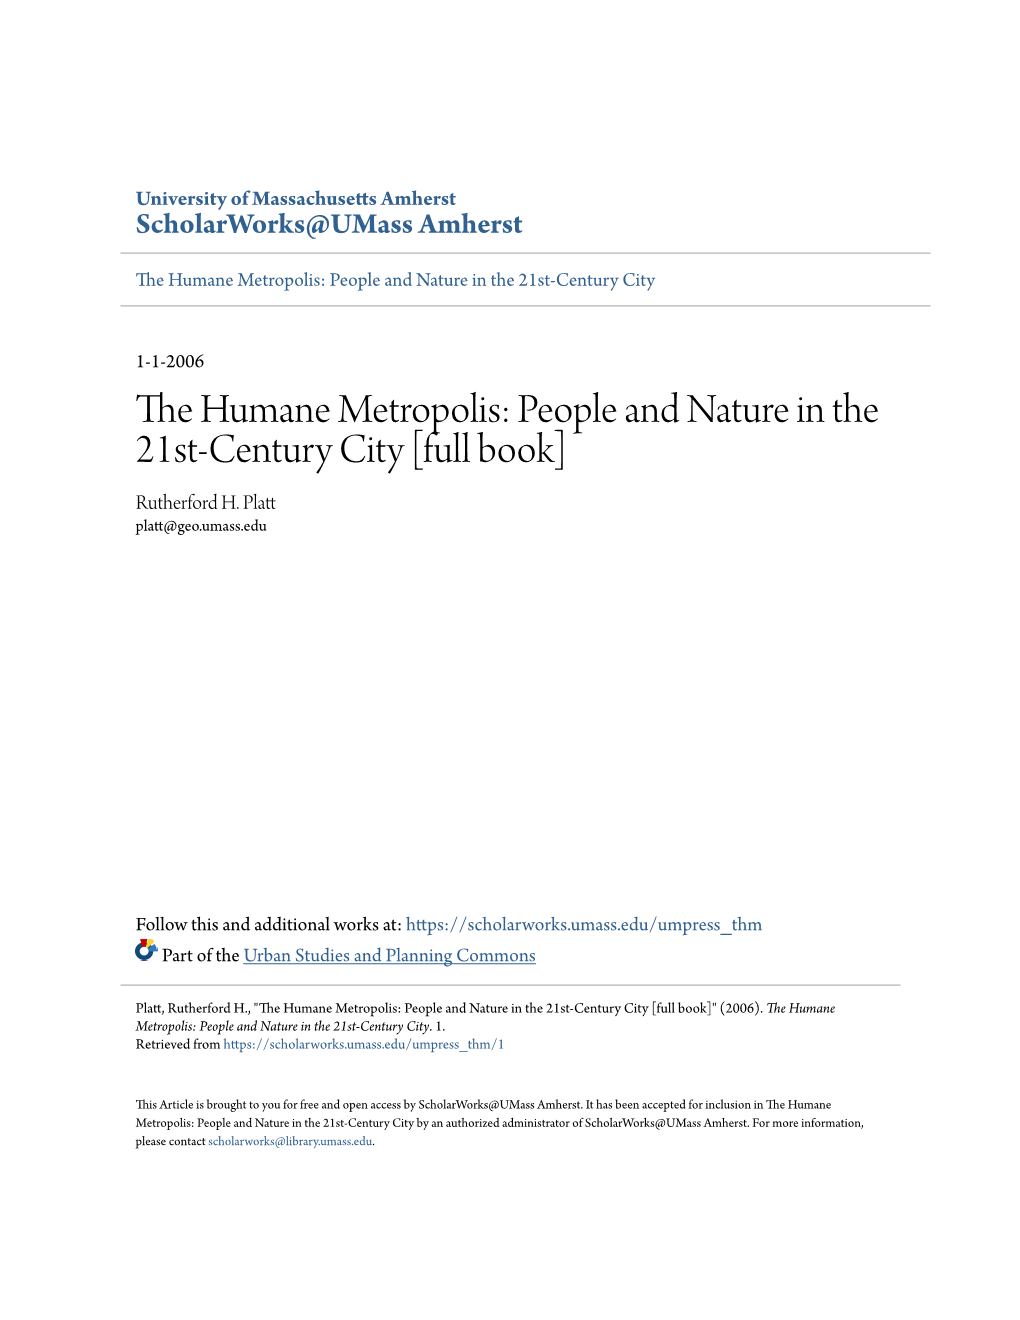 The Humane Metropolis: People and Nature in the 21St-Century City